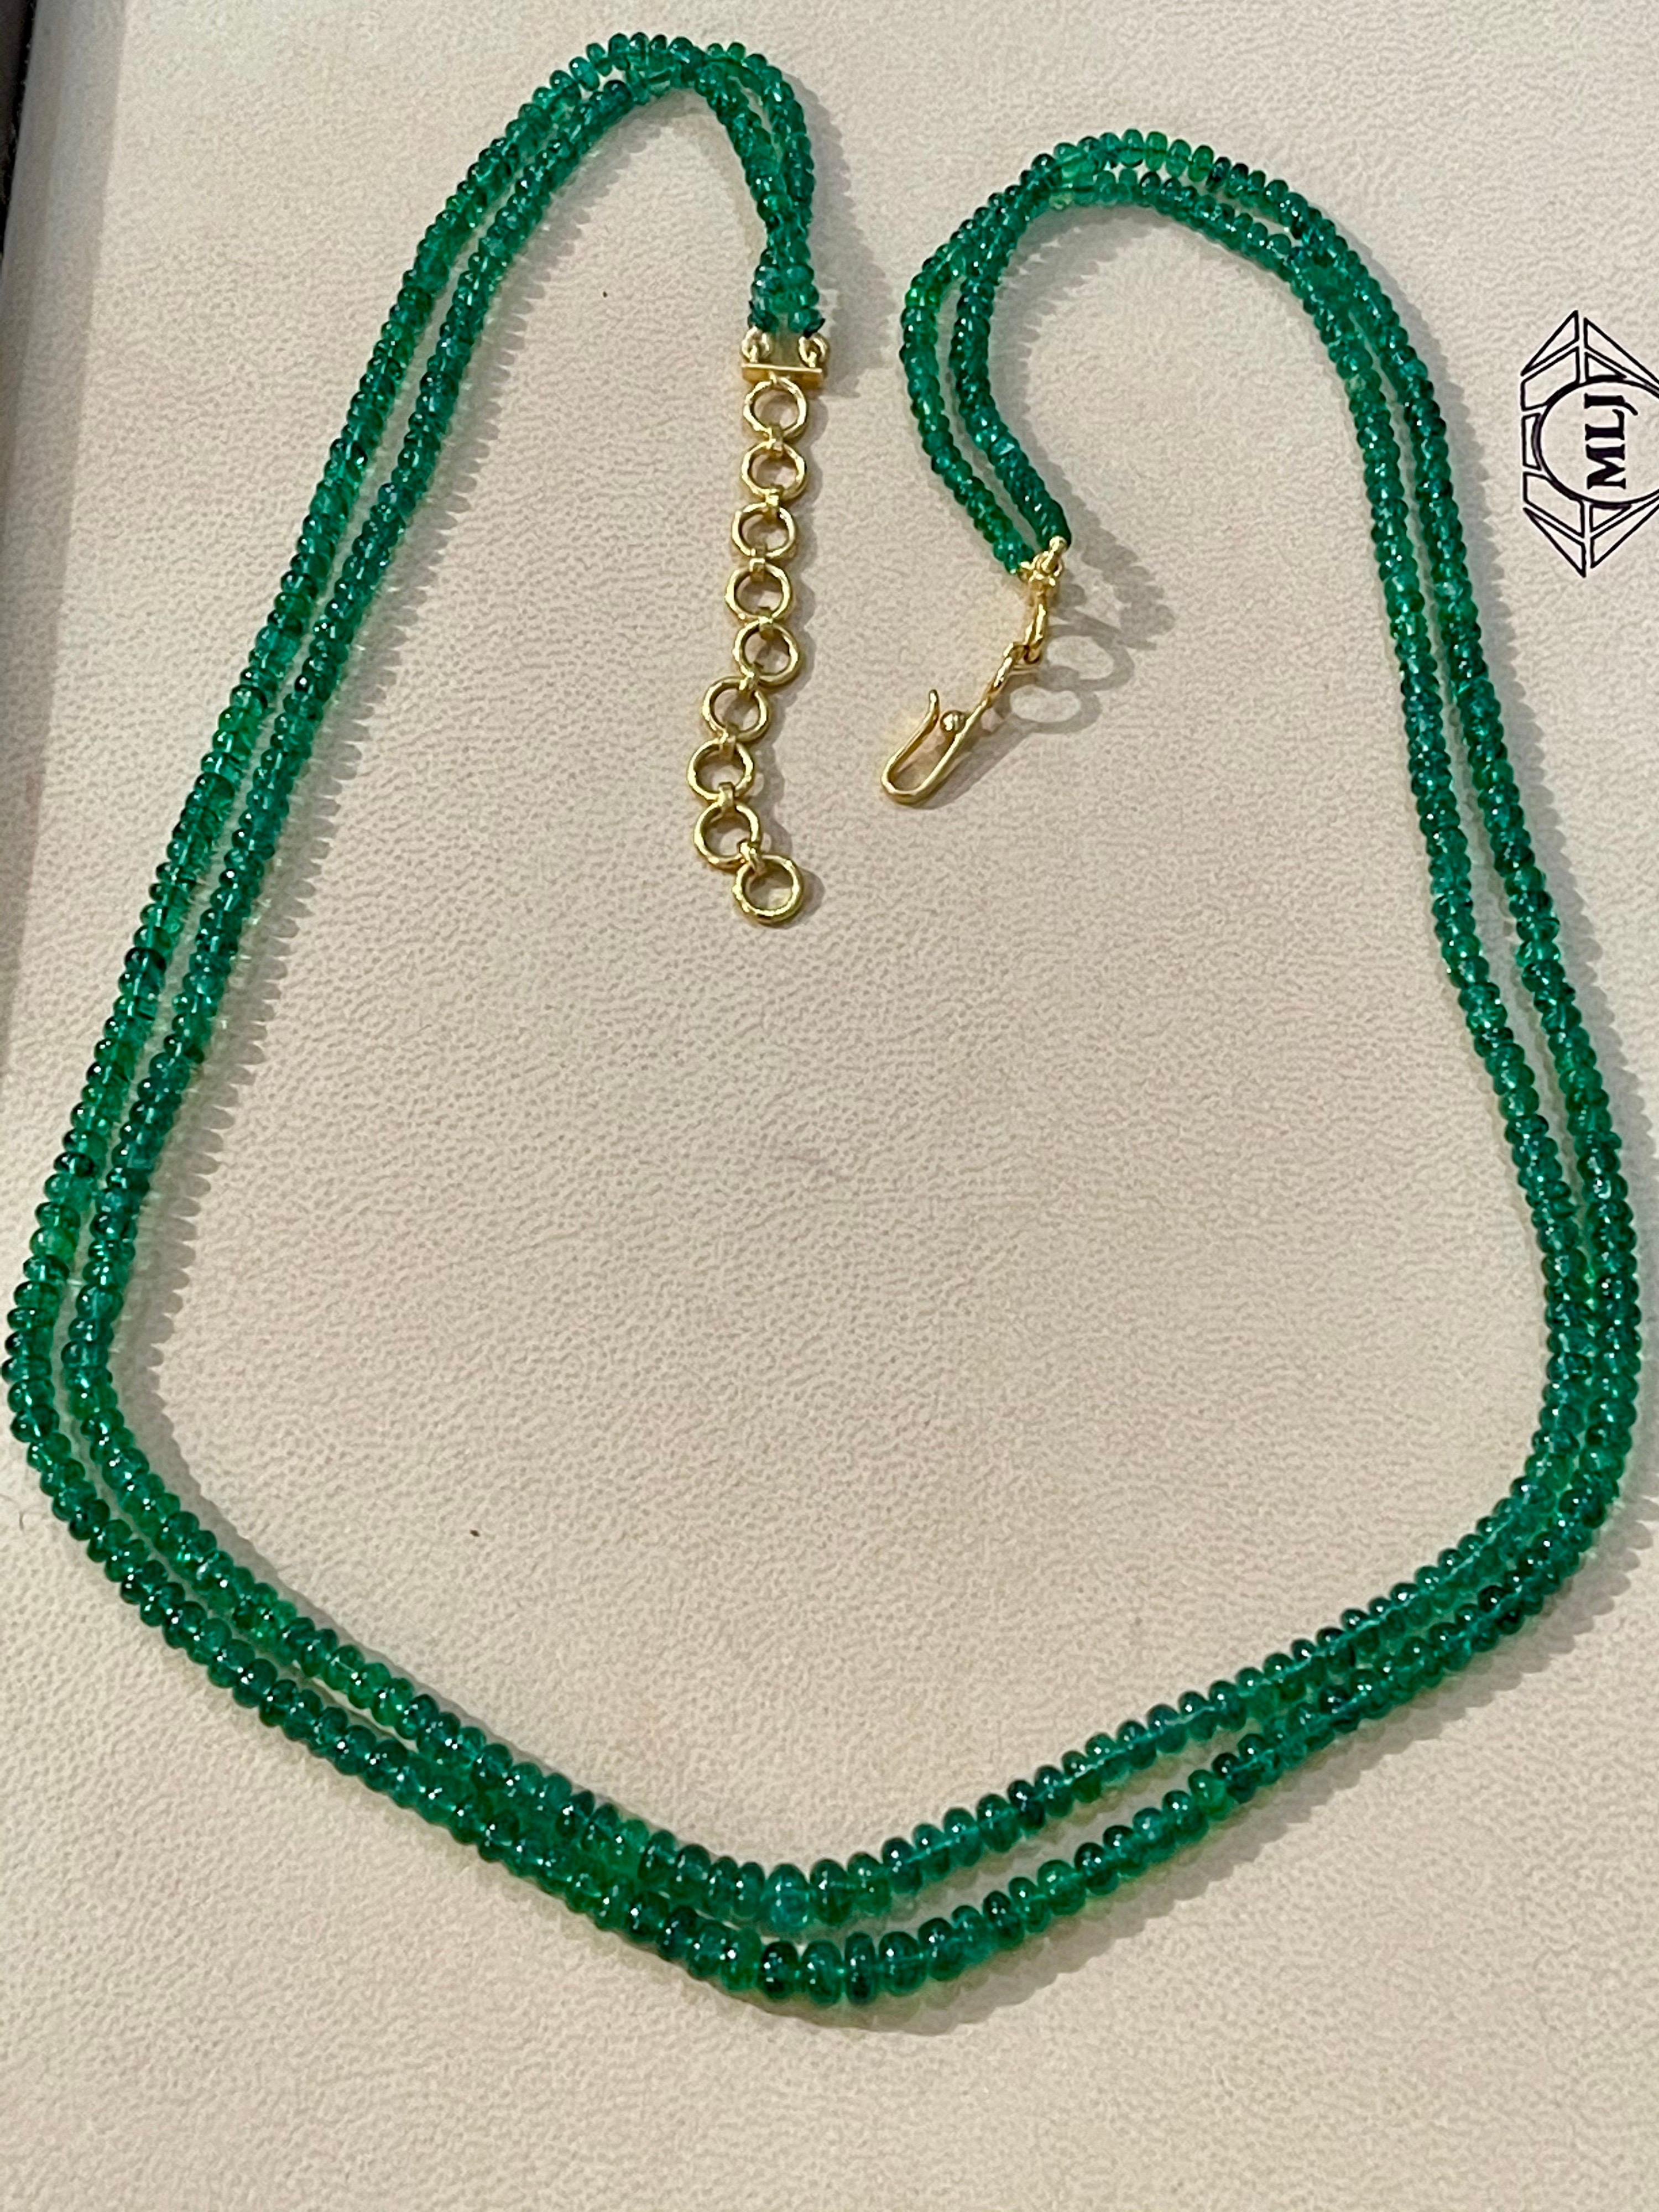 125ct Fine Emerald Beads 2 Line Necklace with 14 Kt Yellow Gold Clasp Adjustable 2